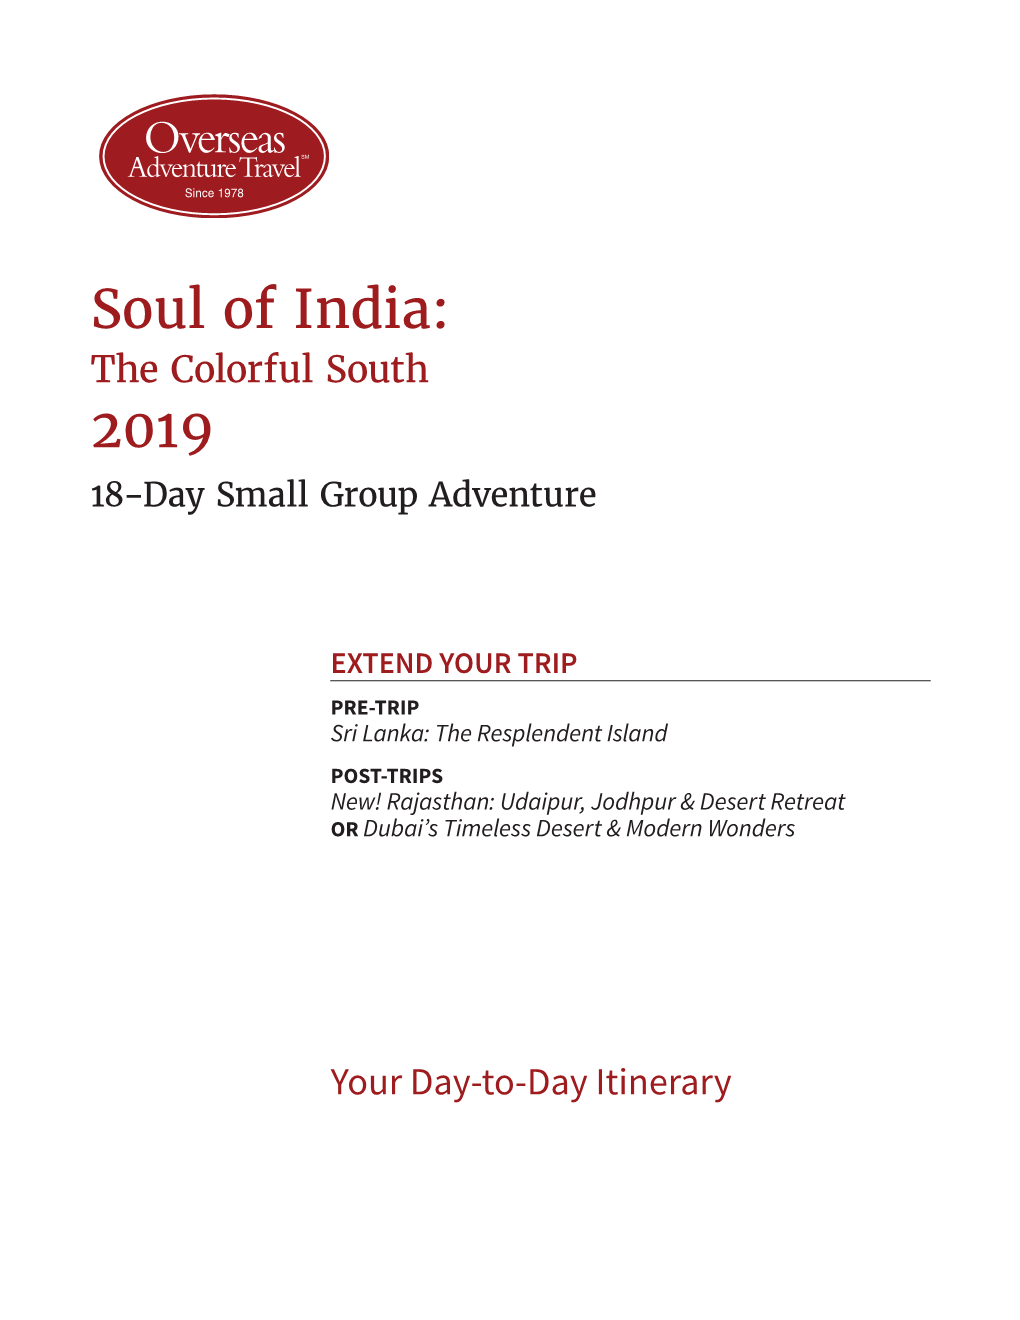 Soul of India: the Colorful South 2019 18-Day Small Group Adventure